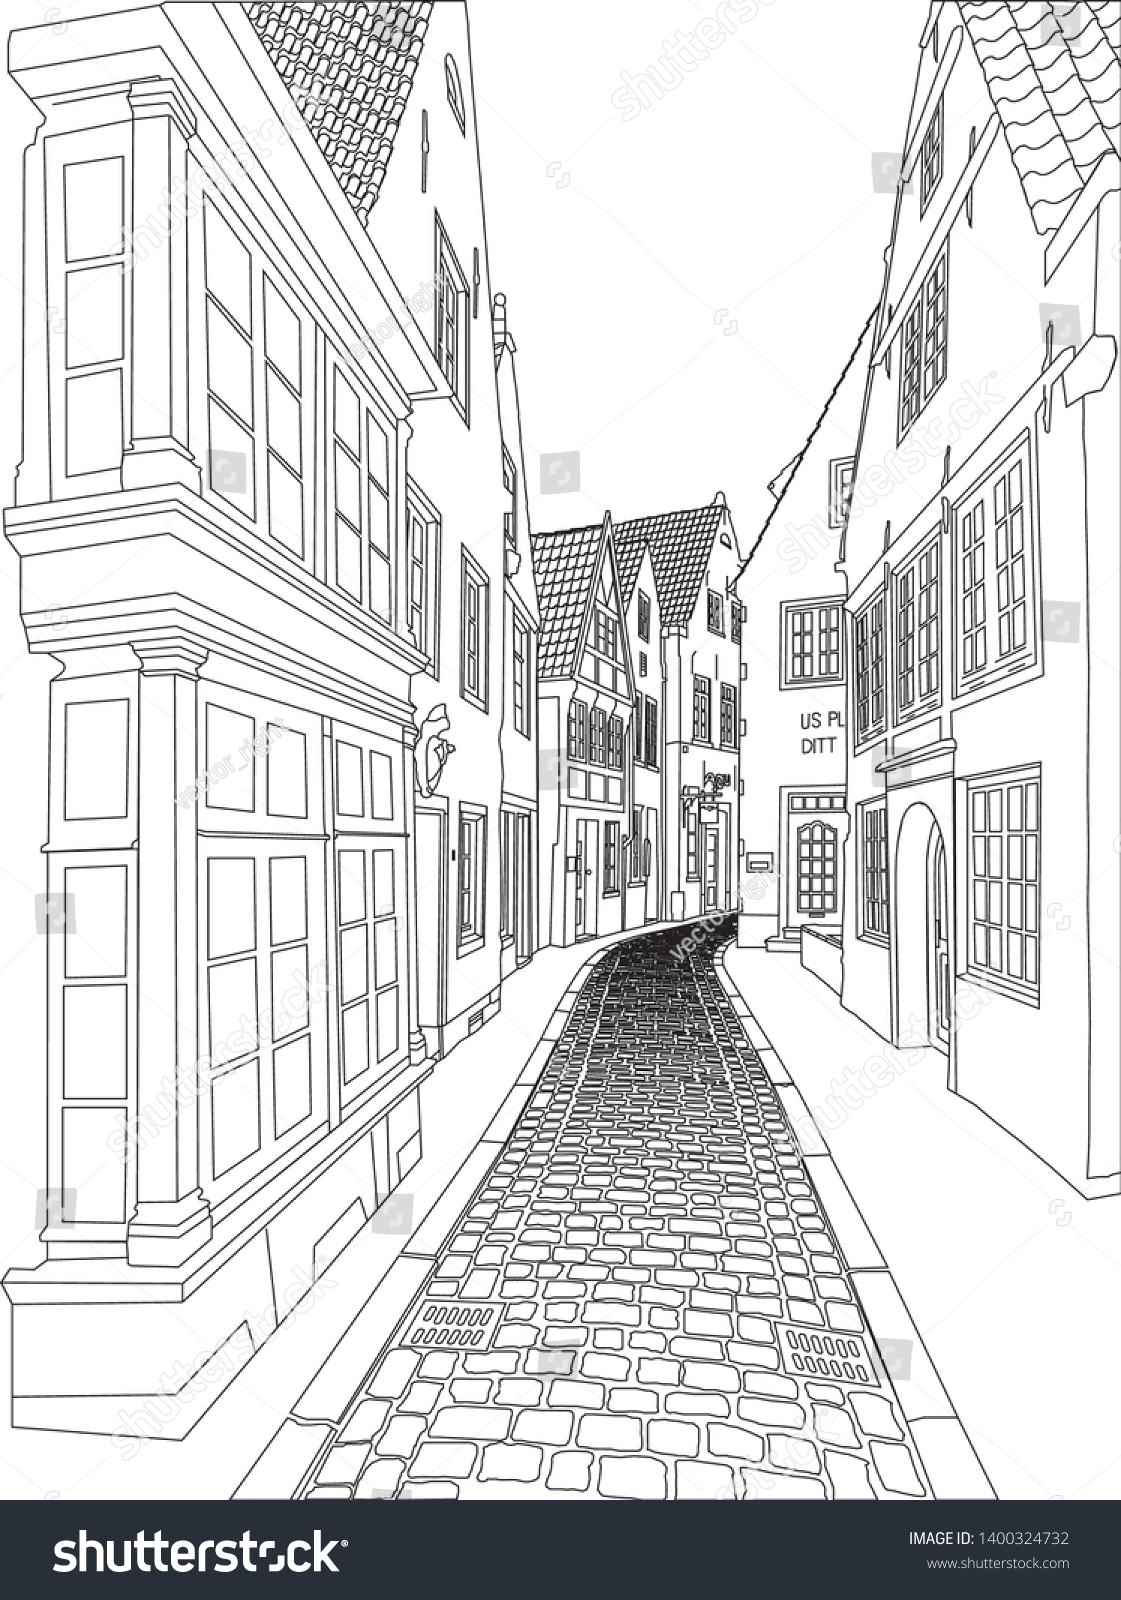 Old Fashion Alleyway Illustration Vector Stock Vector Royalty Free